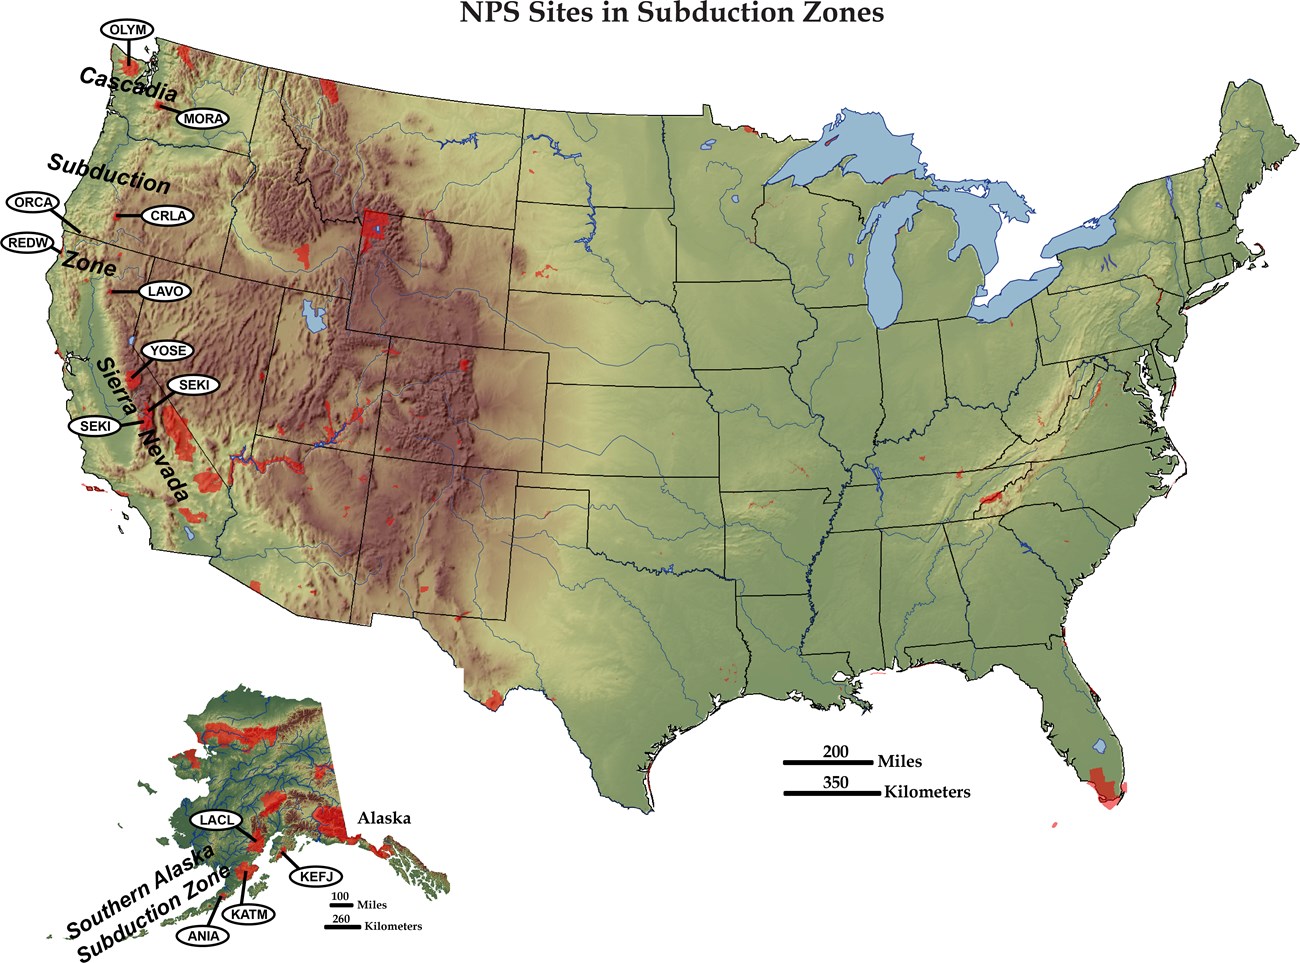 https://www.nps.gov/articles/images/fig-4-1-subduction-zone-relief-map-new-10x_2.jpg?maxwidth=1300&autorotate=false